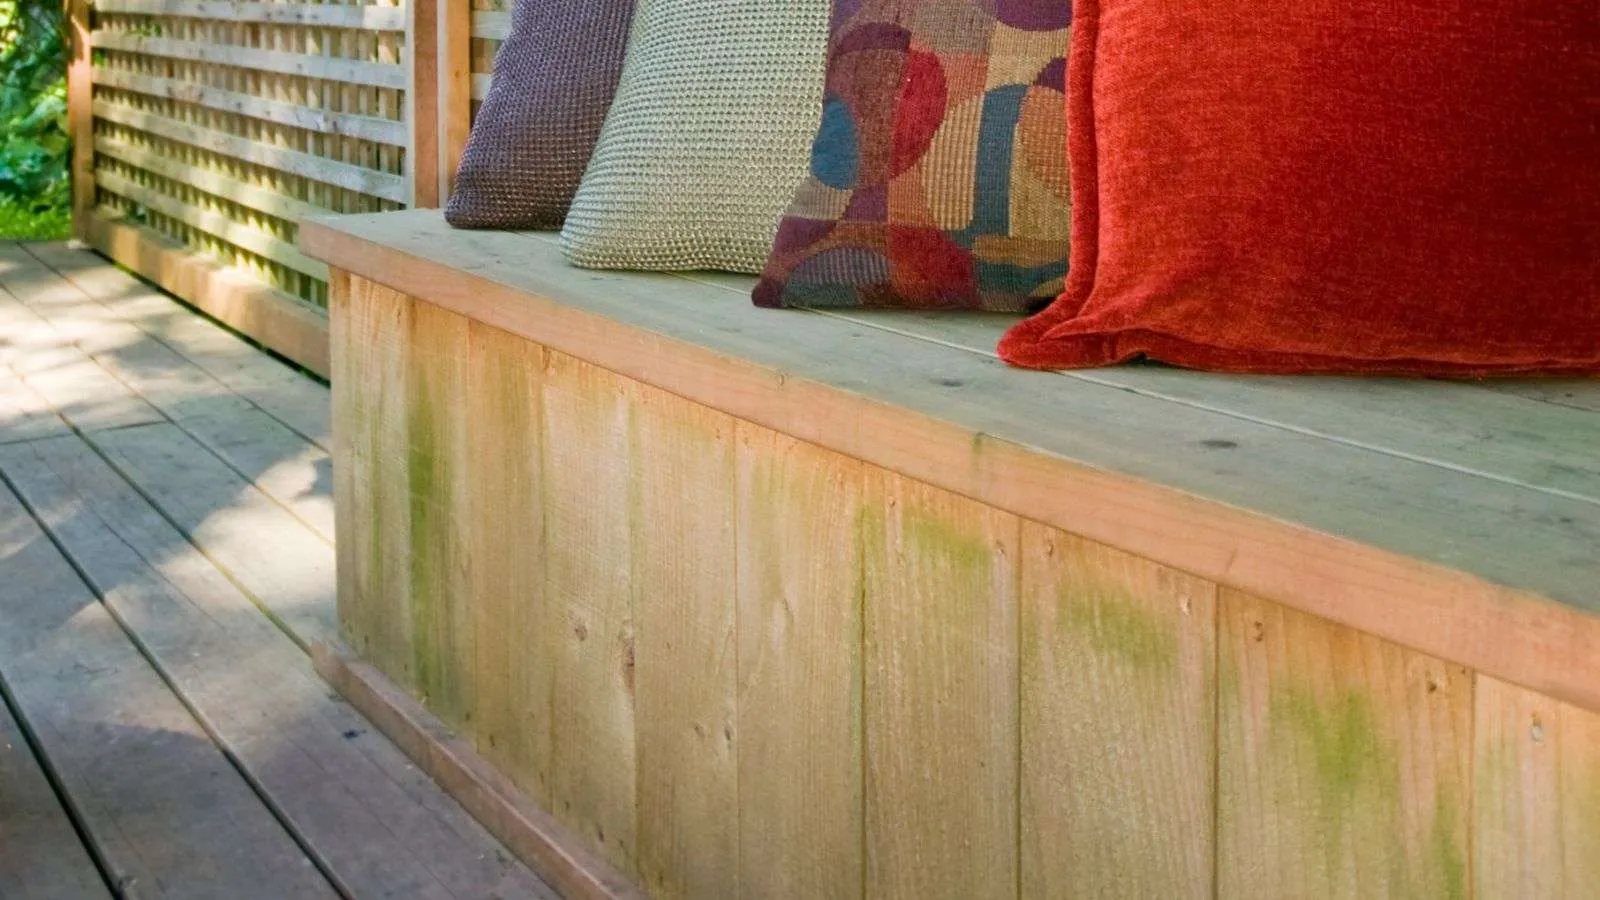 roach infestation in outdoor storage benches - bighomeprojects.com